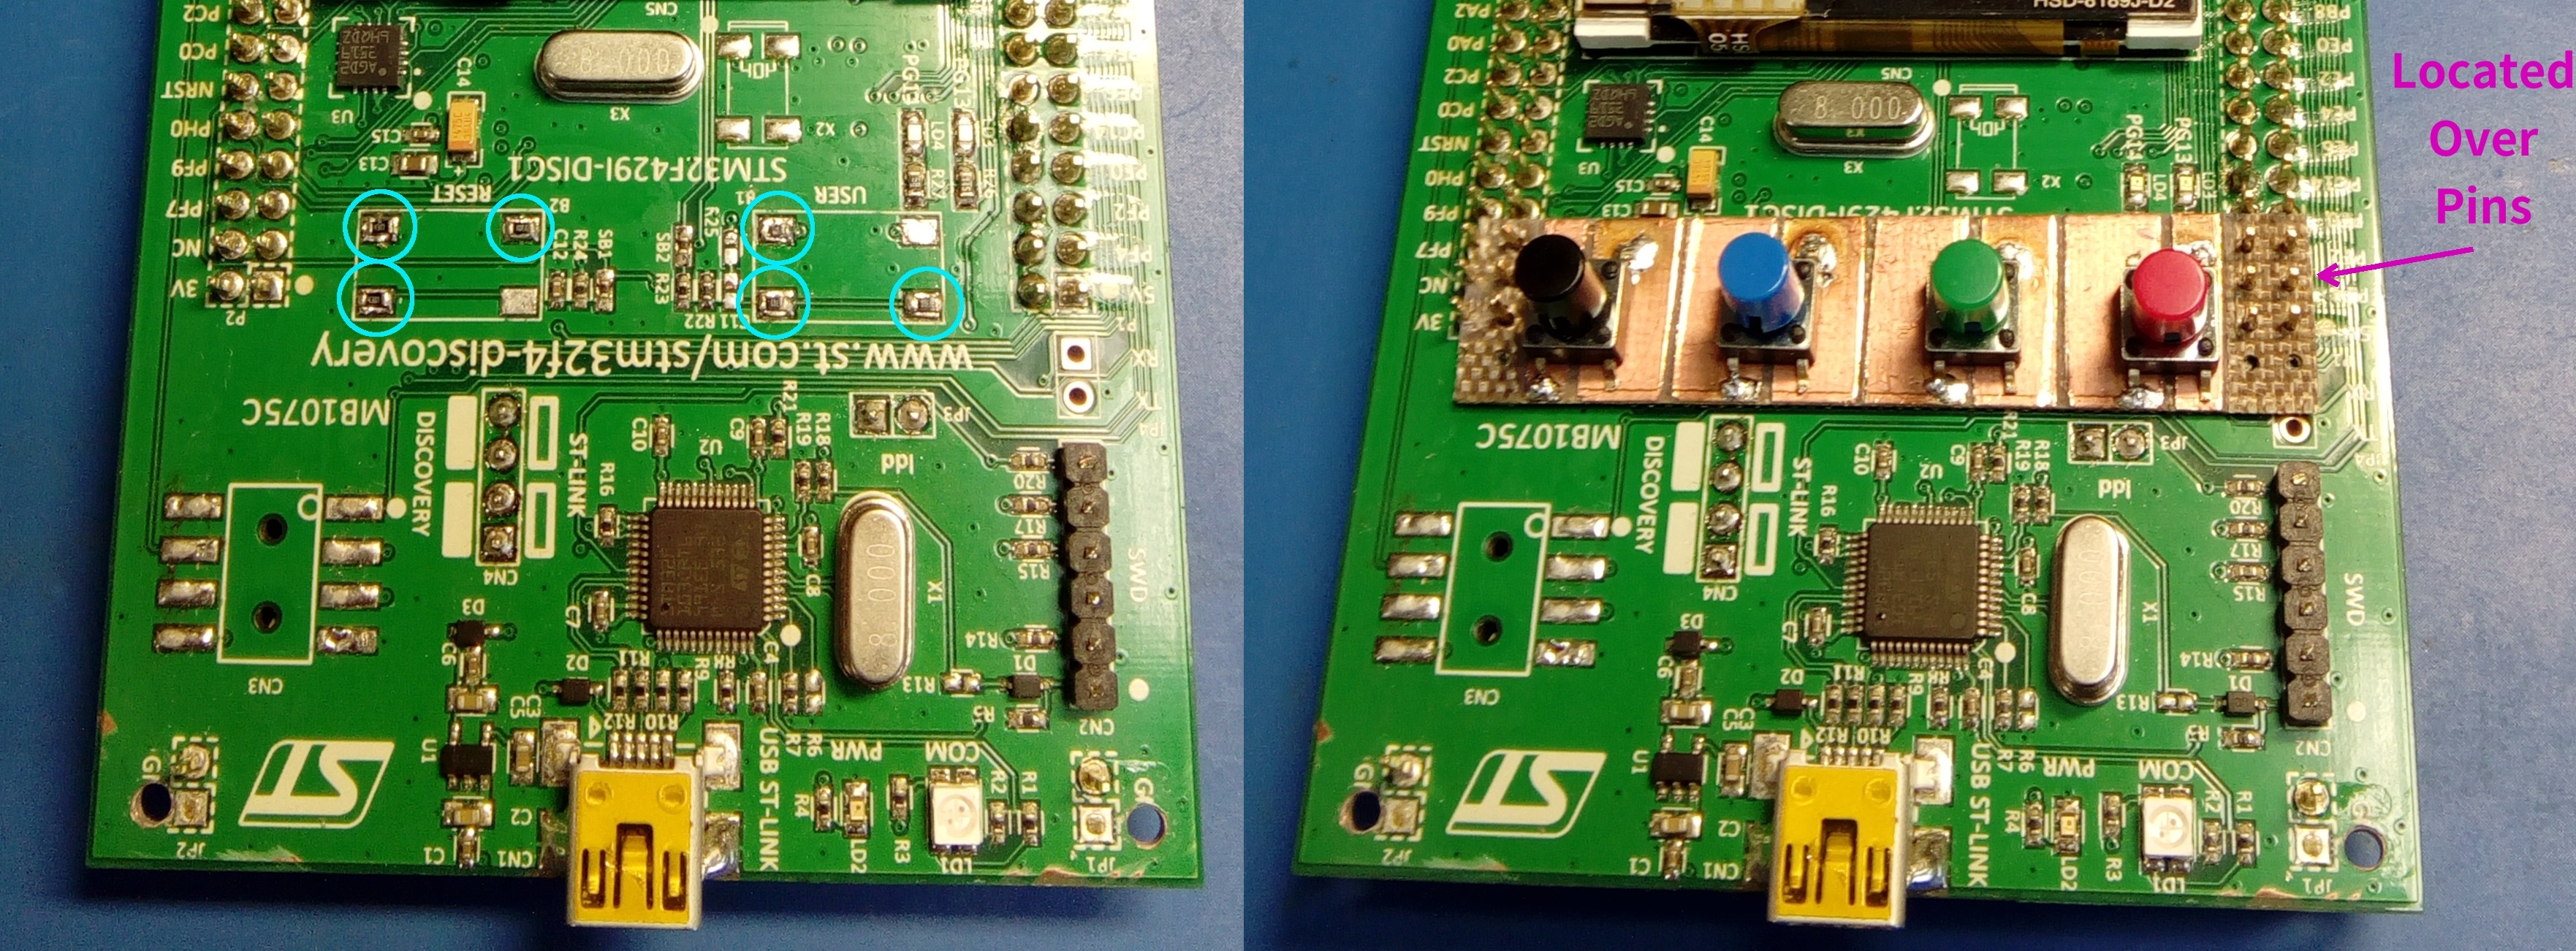 G0ETP V2 SDR 0603 Button Support Rs and Button Board Located Over Pins